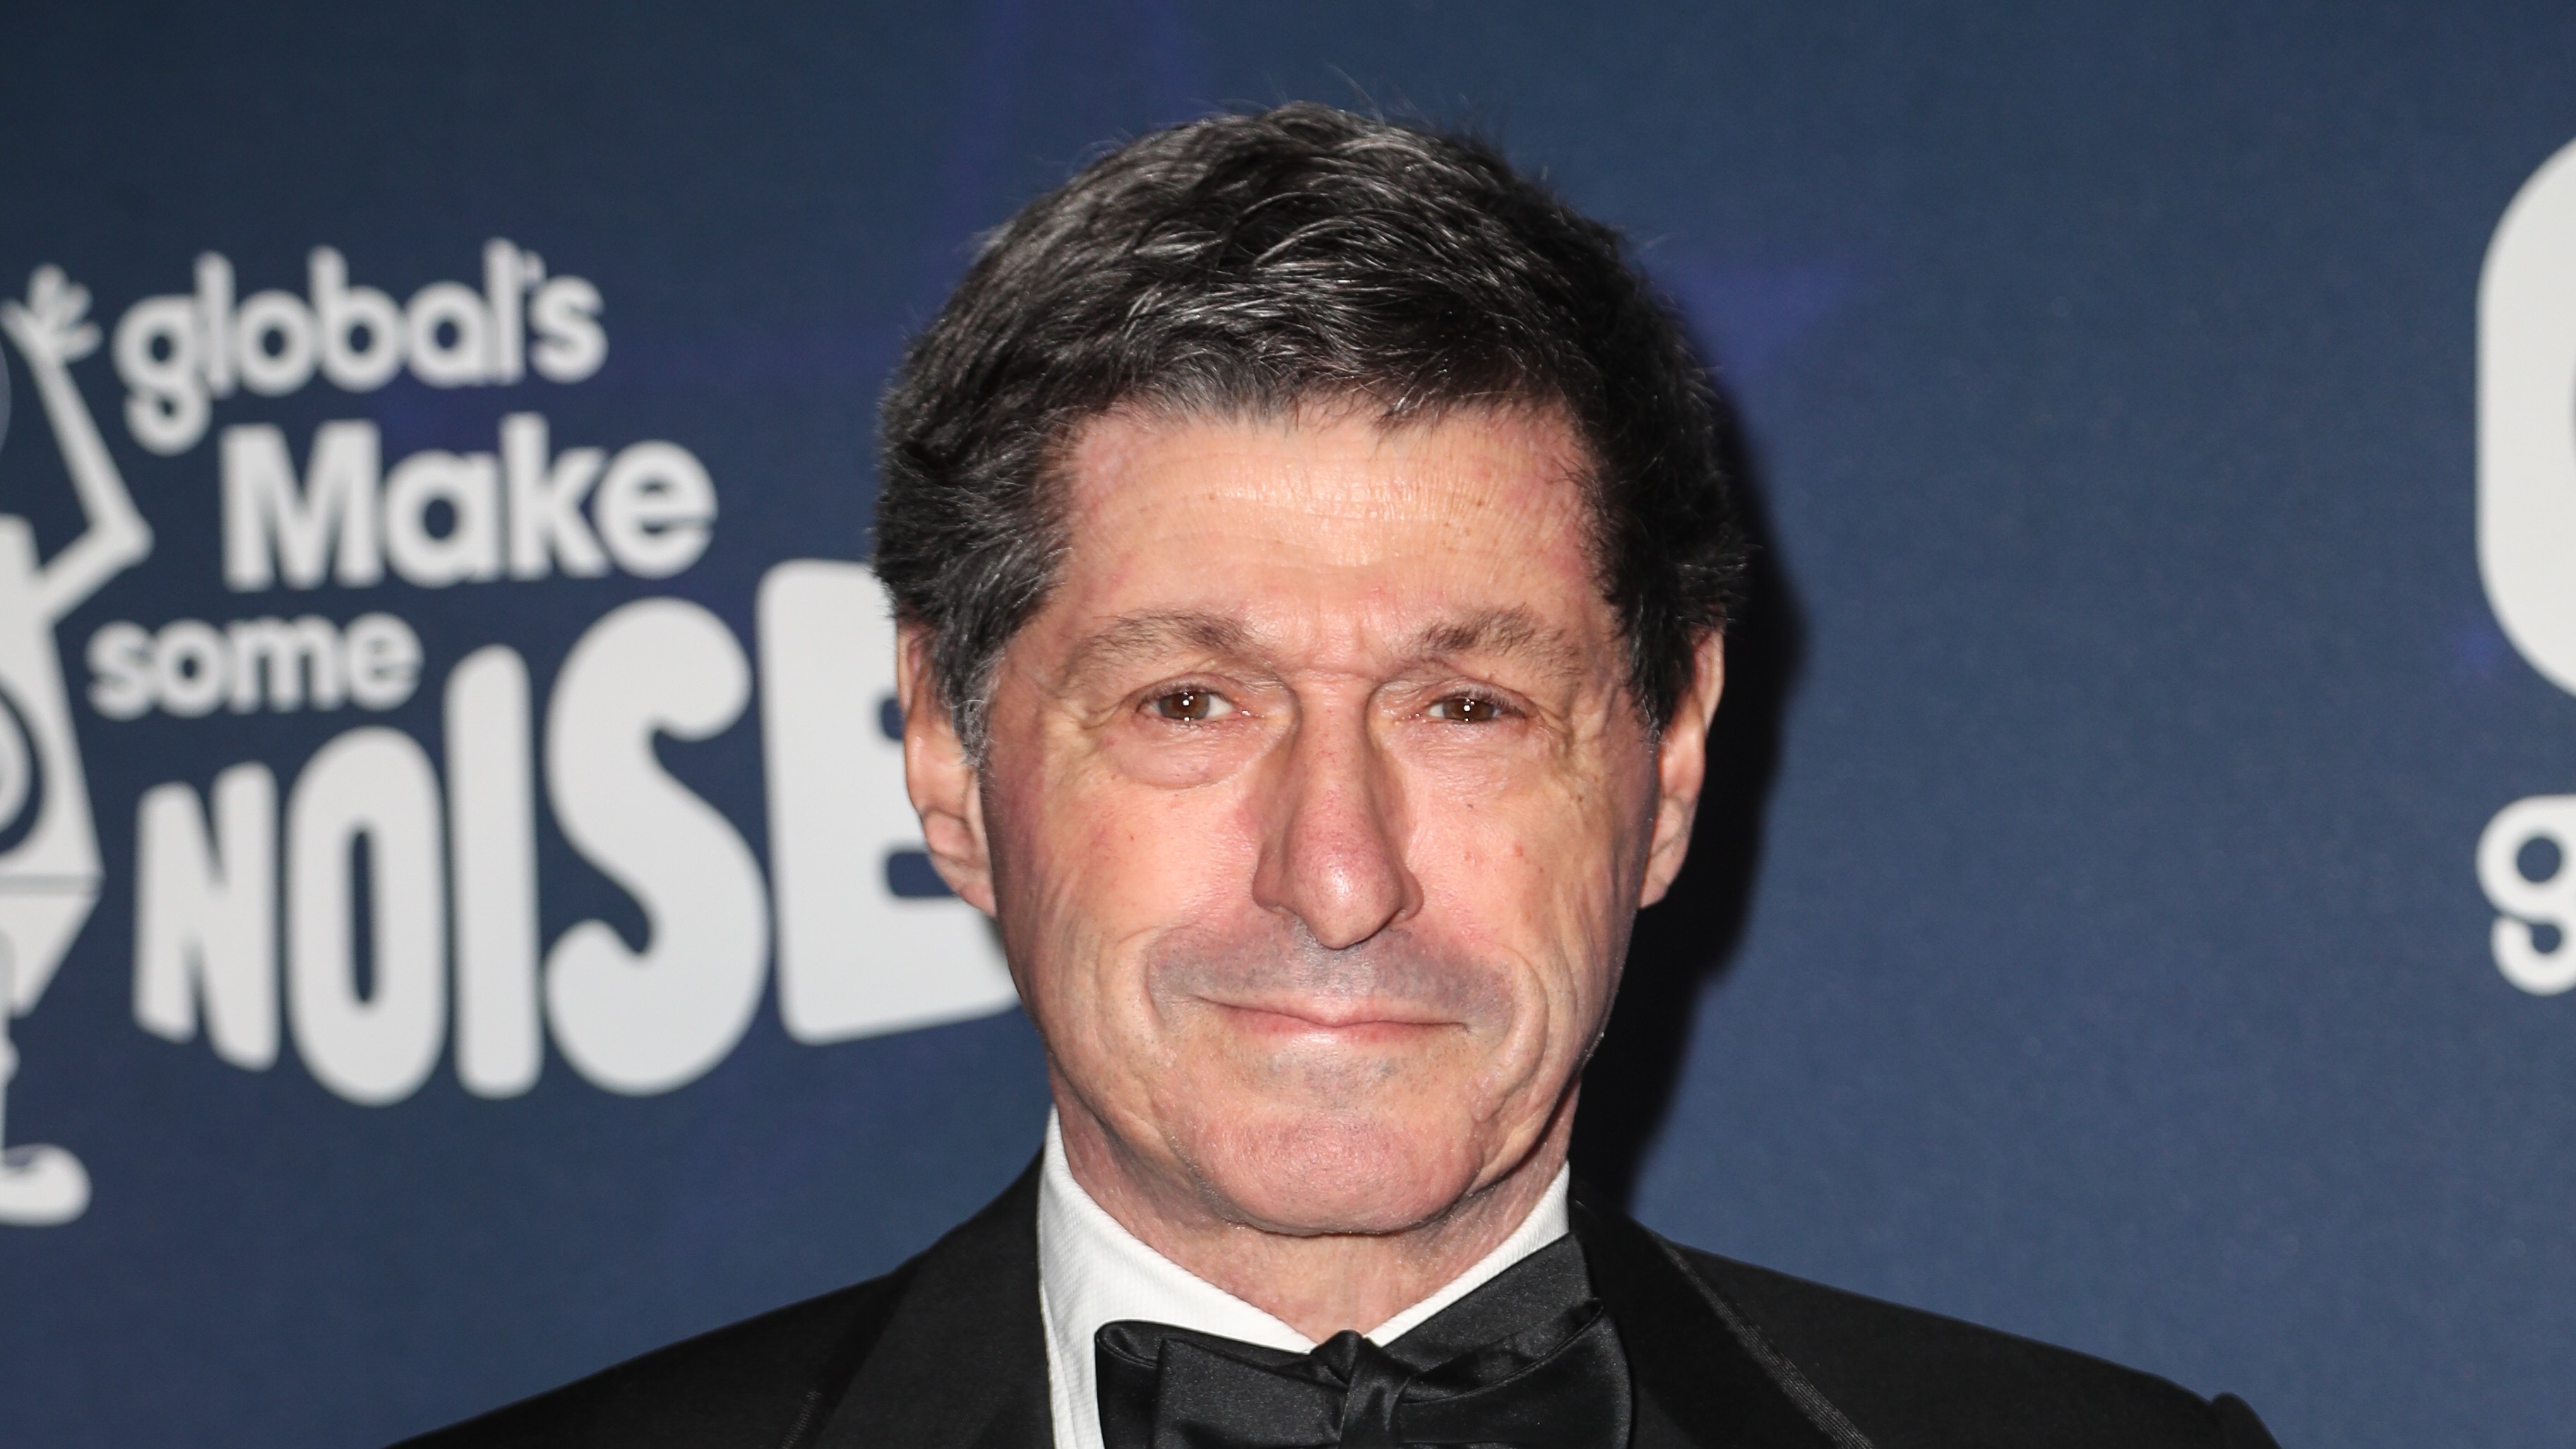 Jon Sopel joins Garrick Club but plans to foment ‘change from within’